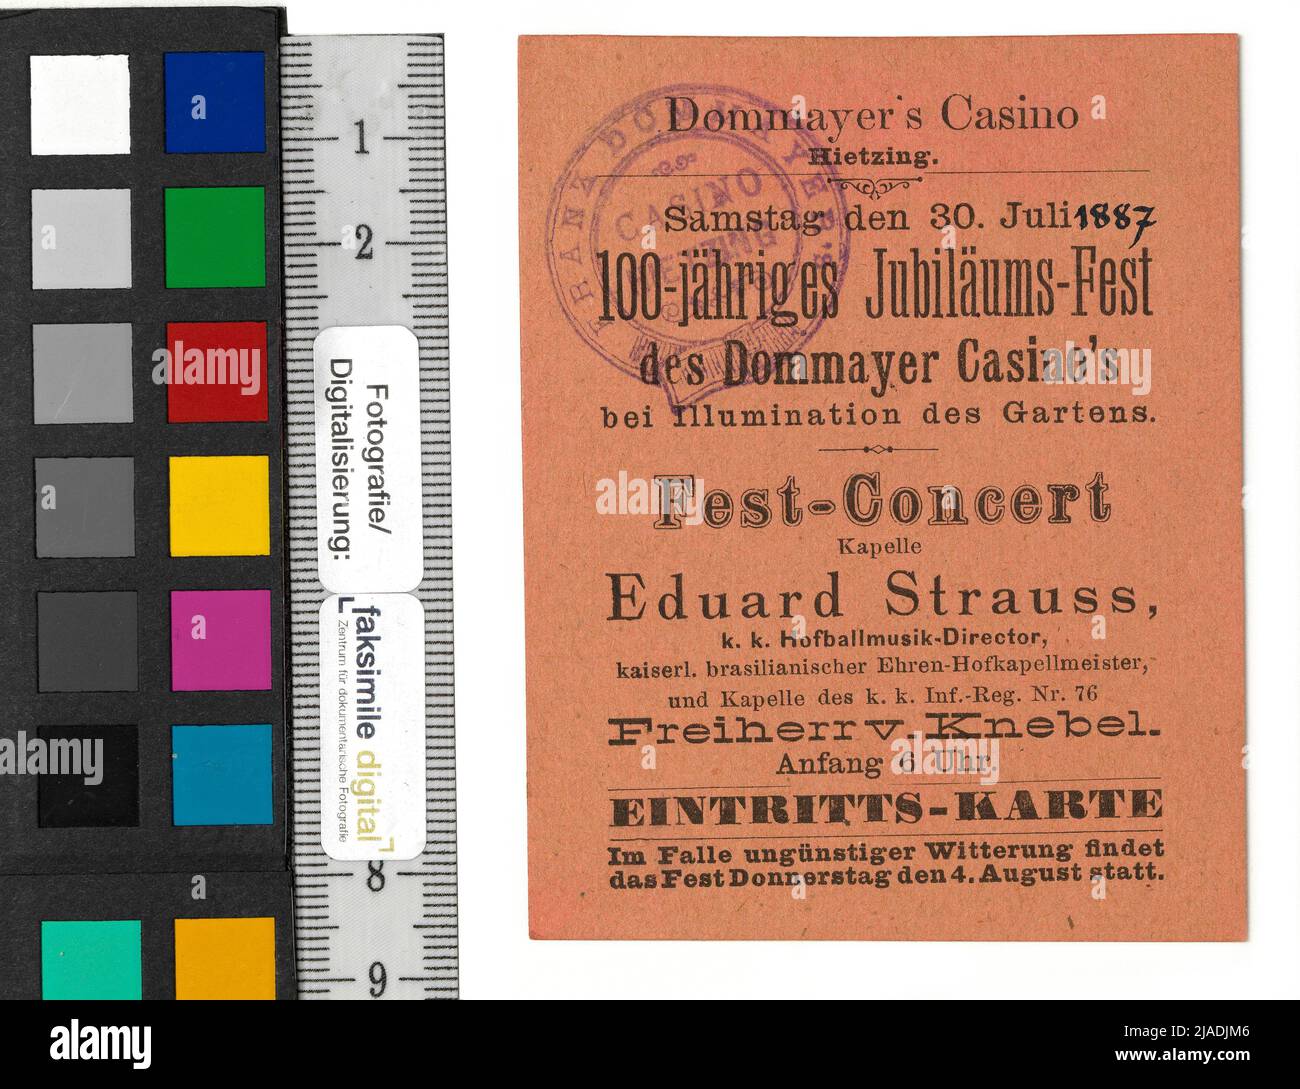 Admission ticket to the '100th anniversary festival of the Dommayer Casino's' with a concert of the Chapel of Eduard Strauss on July 30, 1887. Unknown Stock Photo